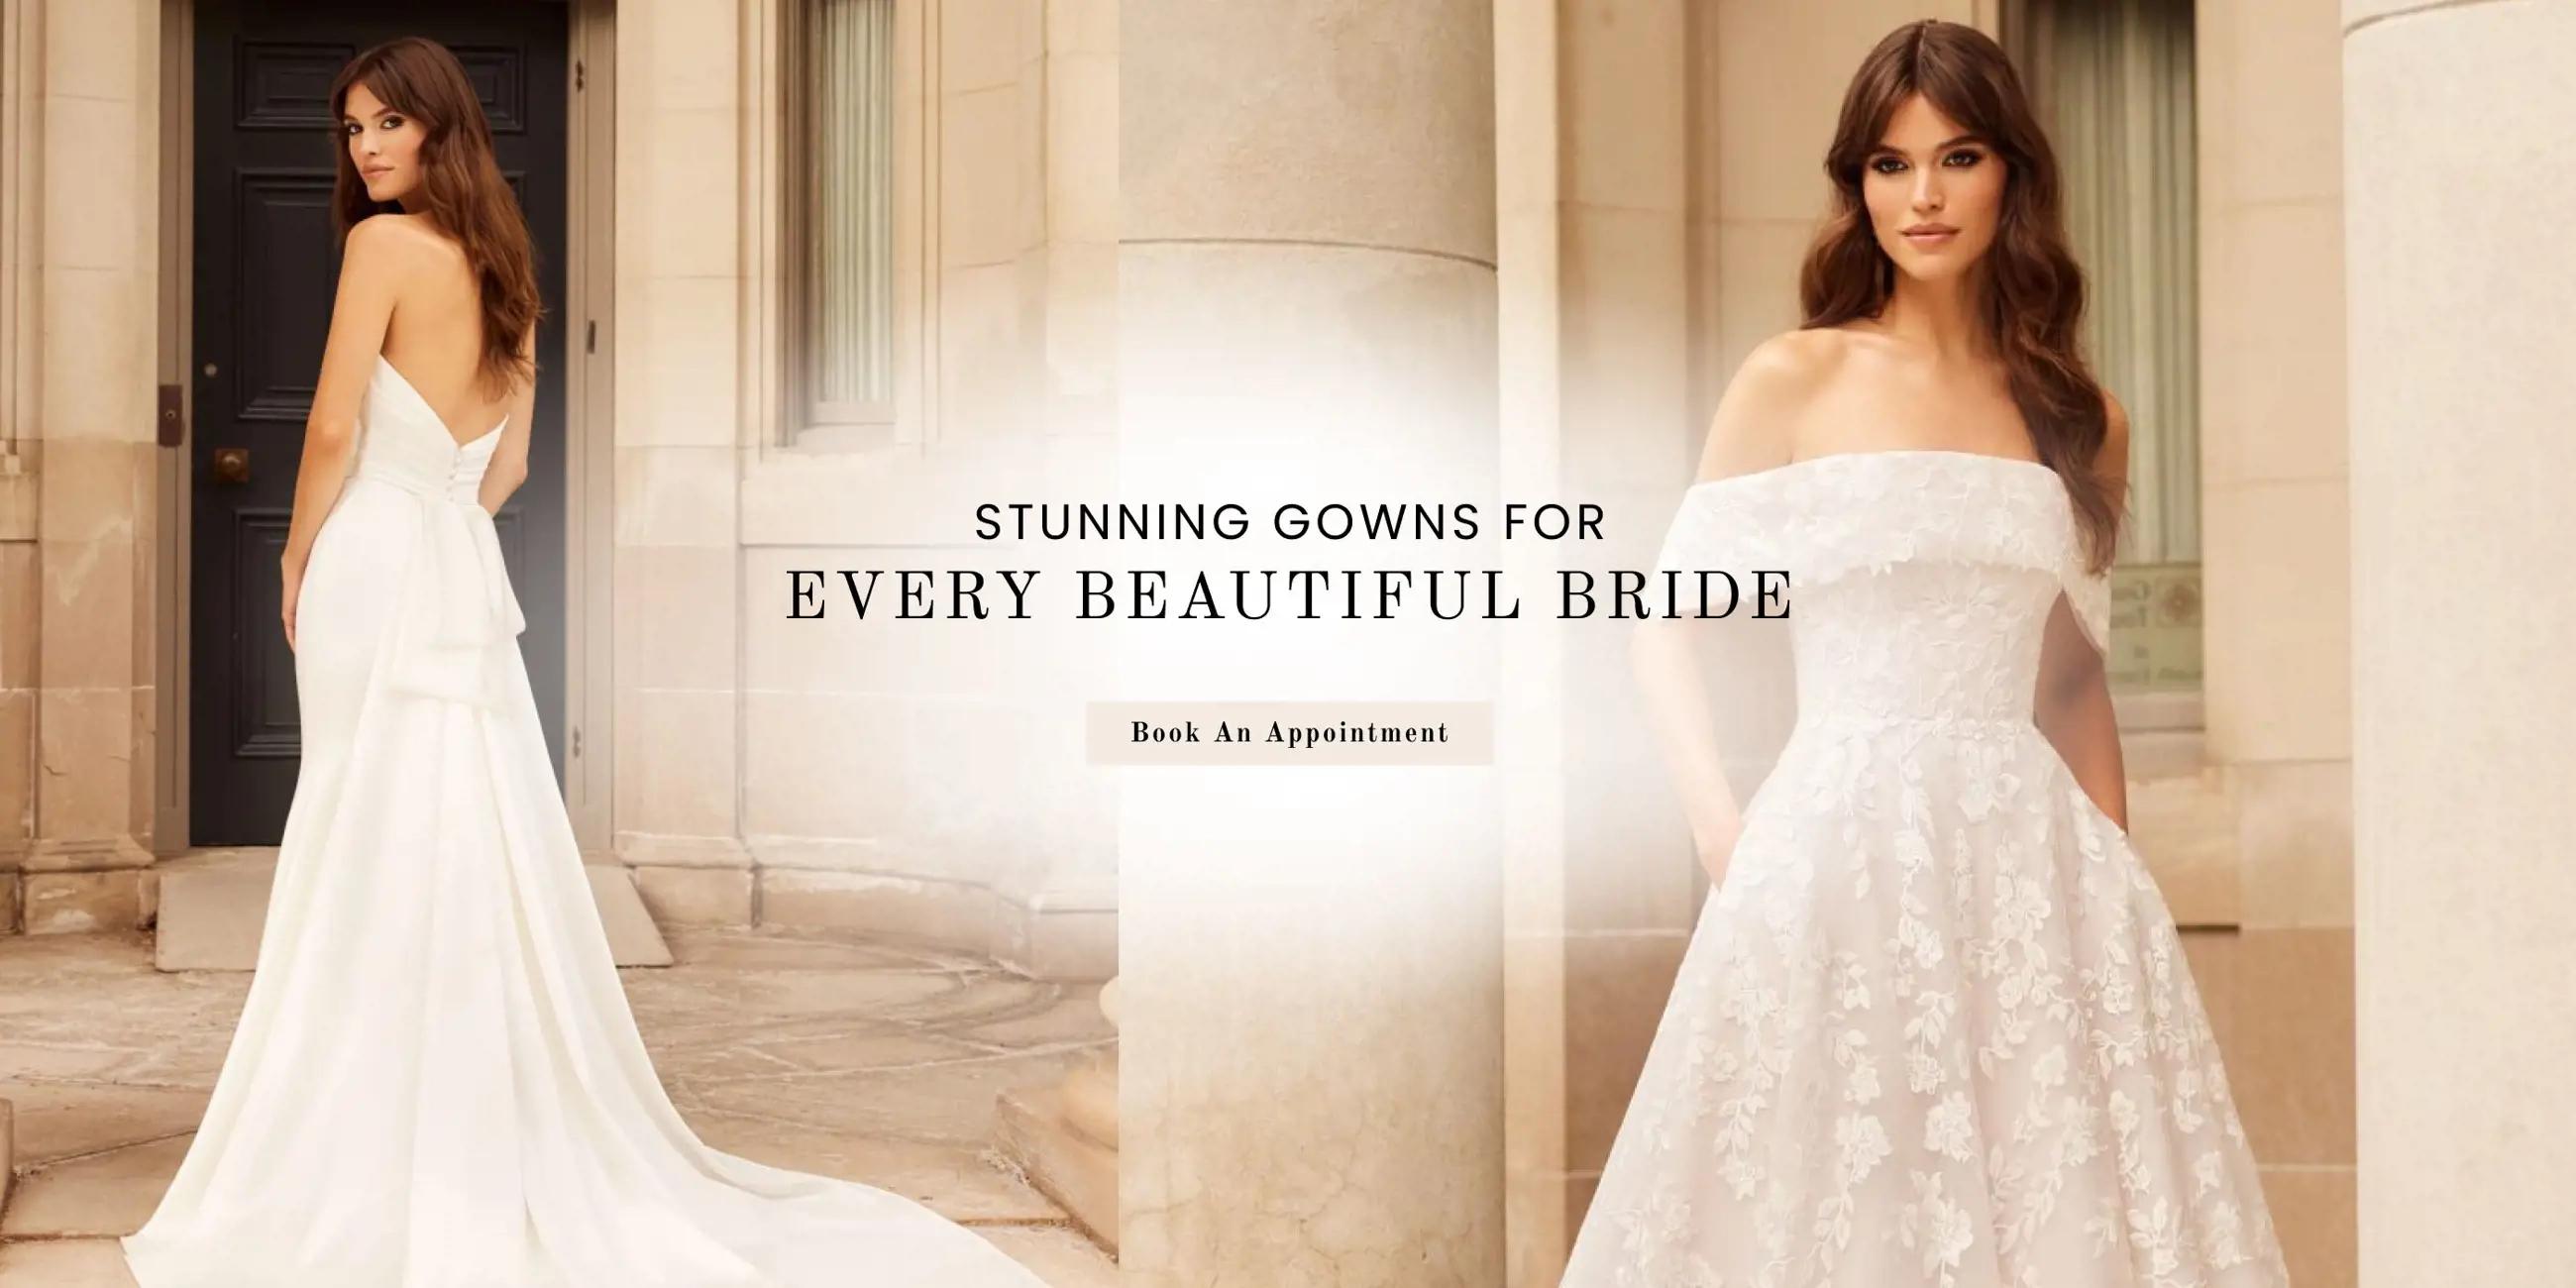 Stunning gowns for every beautiful bride